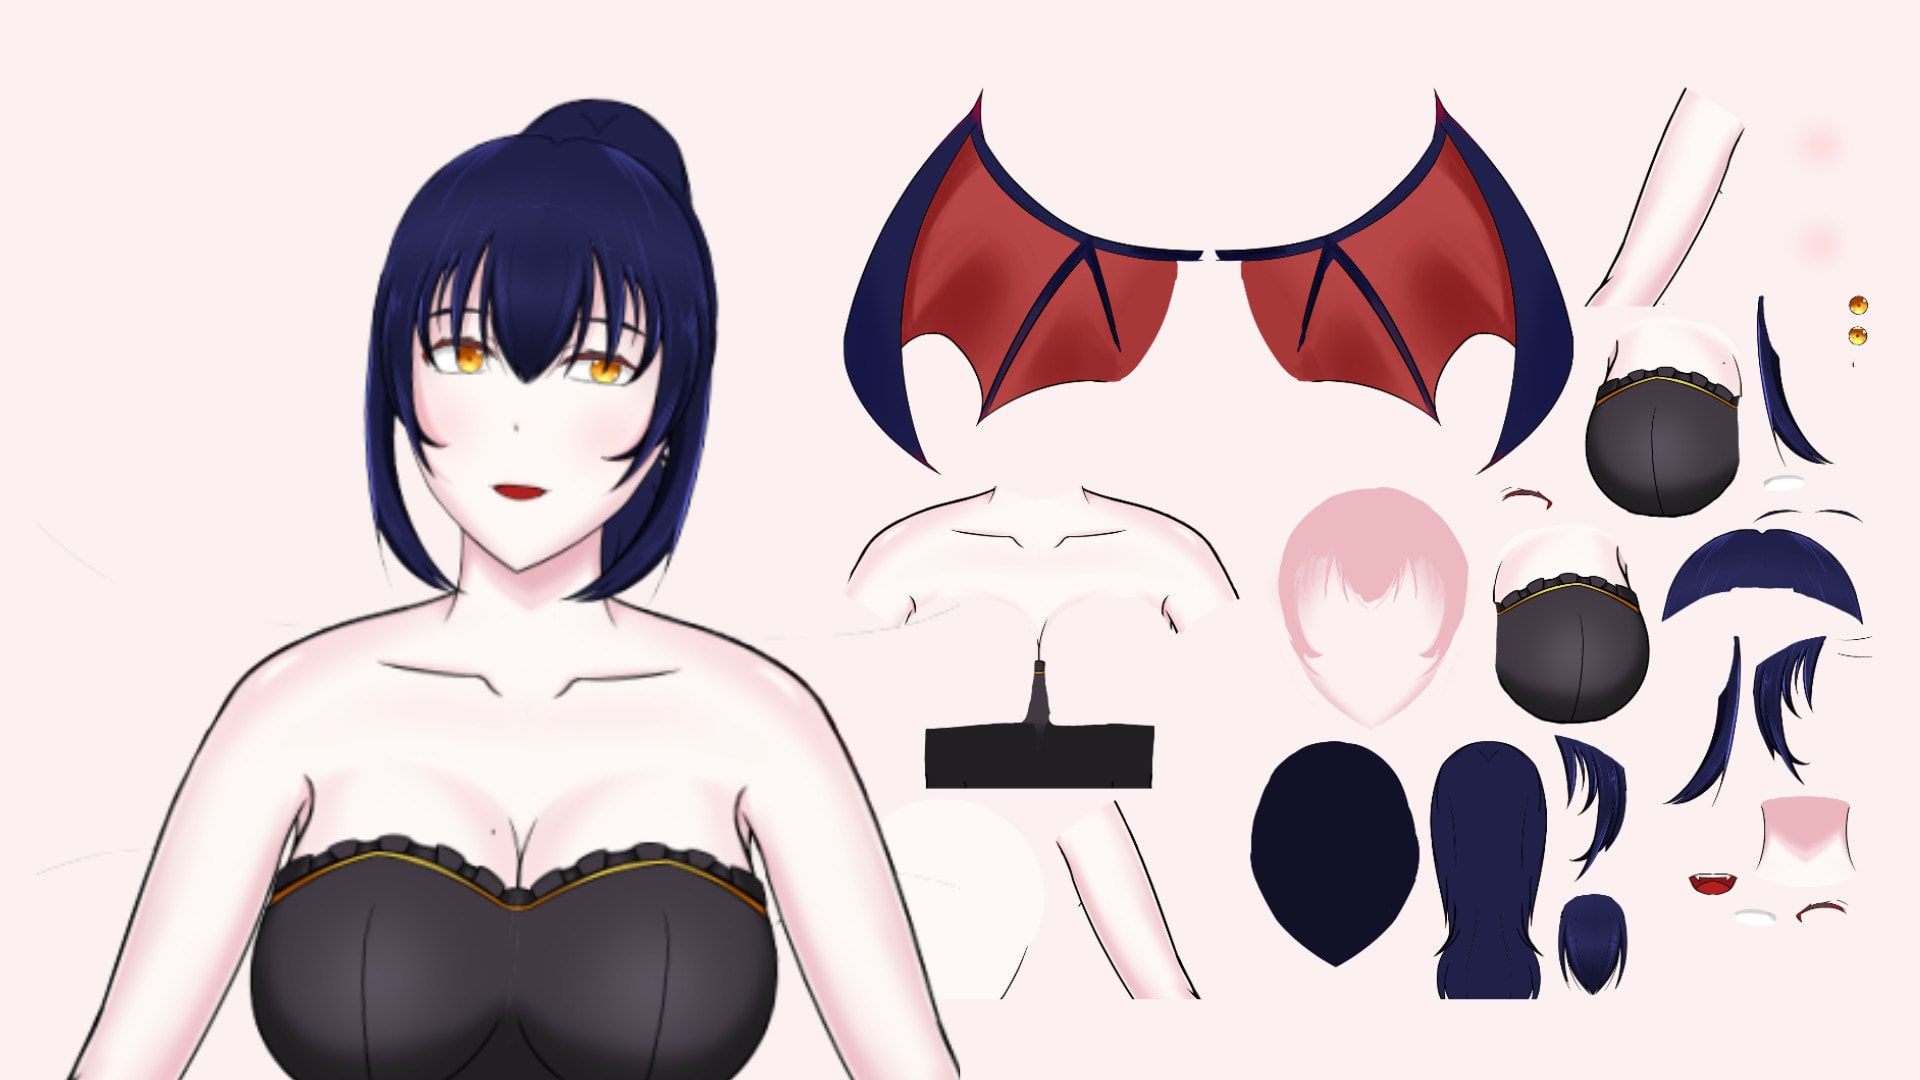 Draw sfw, nsfw anime, live2d model, facerig, vtuber model for twitch or  discord by Livedistic | Fiverr